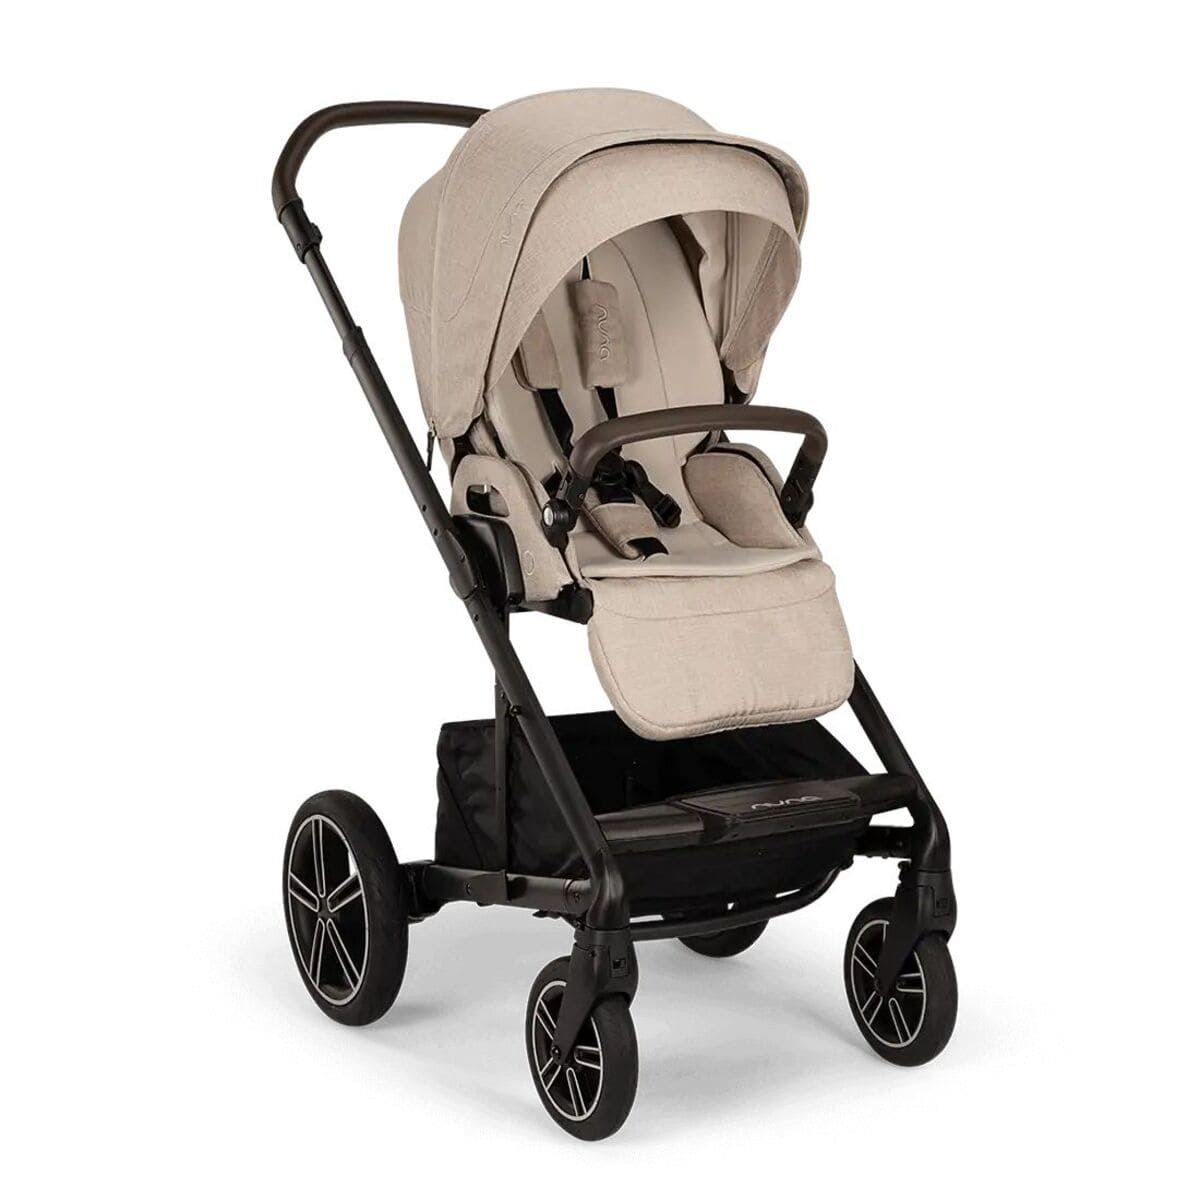 Nuna Mixx Next Stroller with Magnetic Buckle, 8721094503681 - ANB Baby